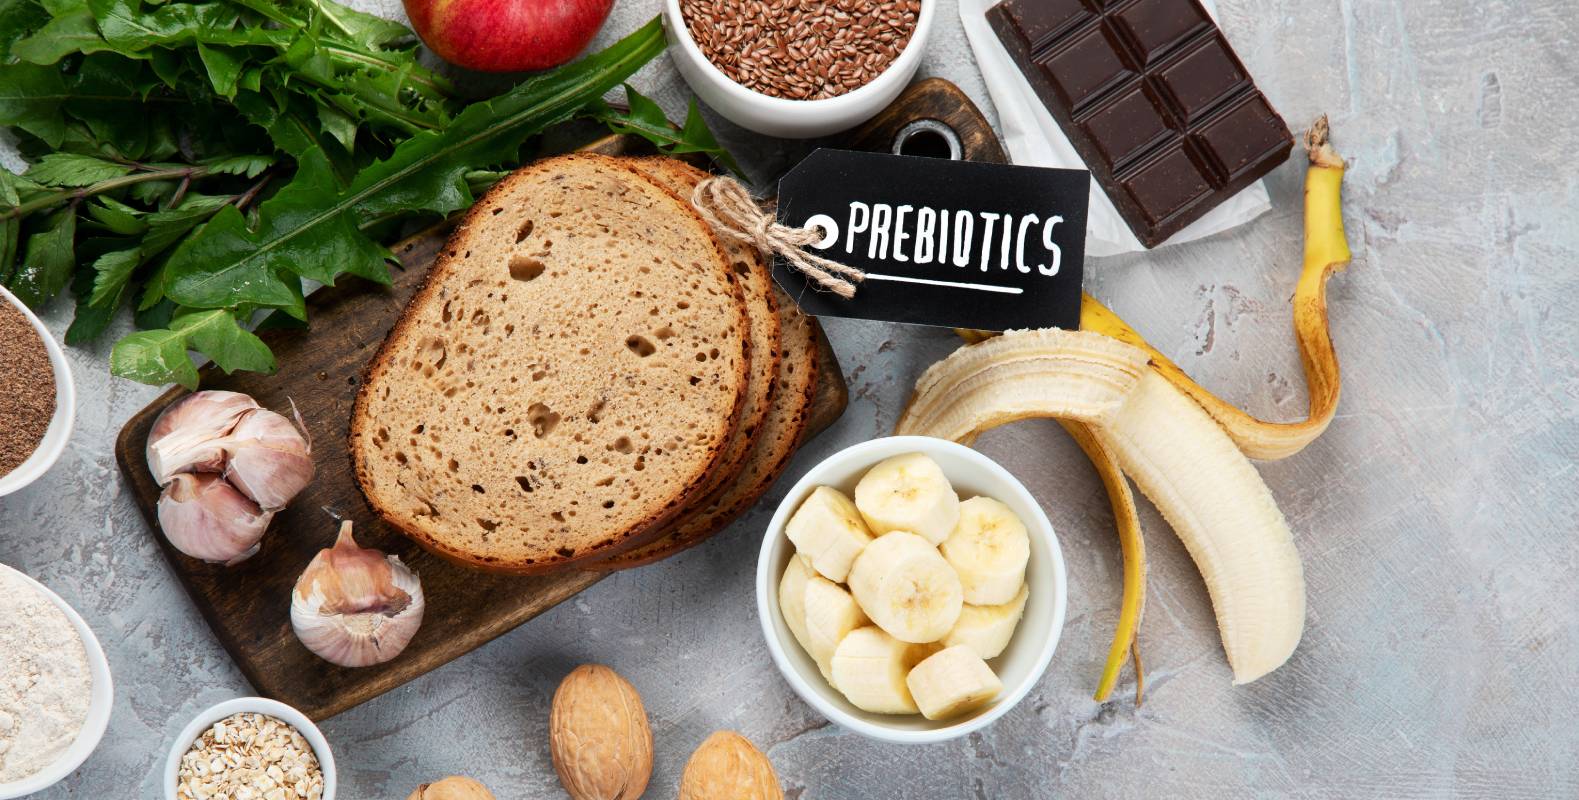 Prebiotics are a relatively new concept in nutrition science.